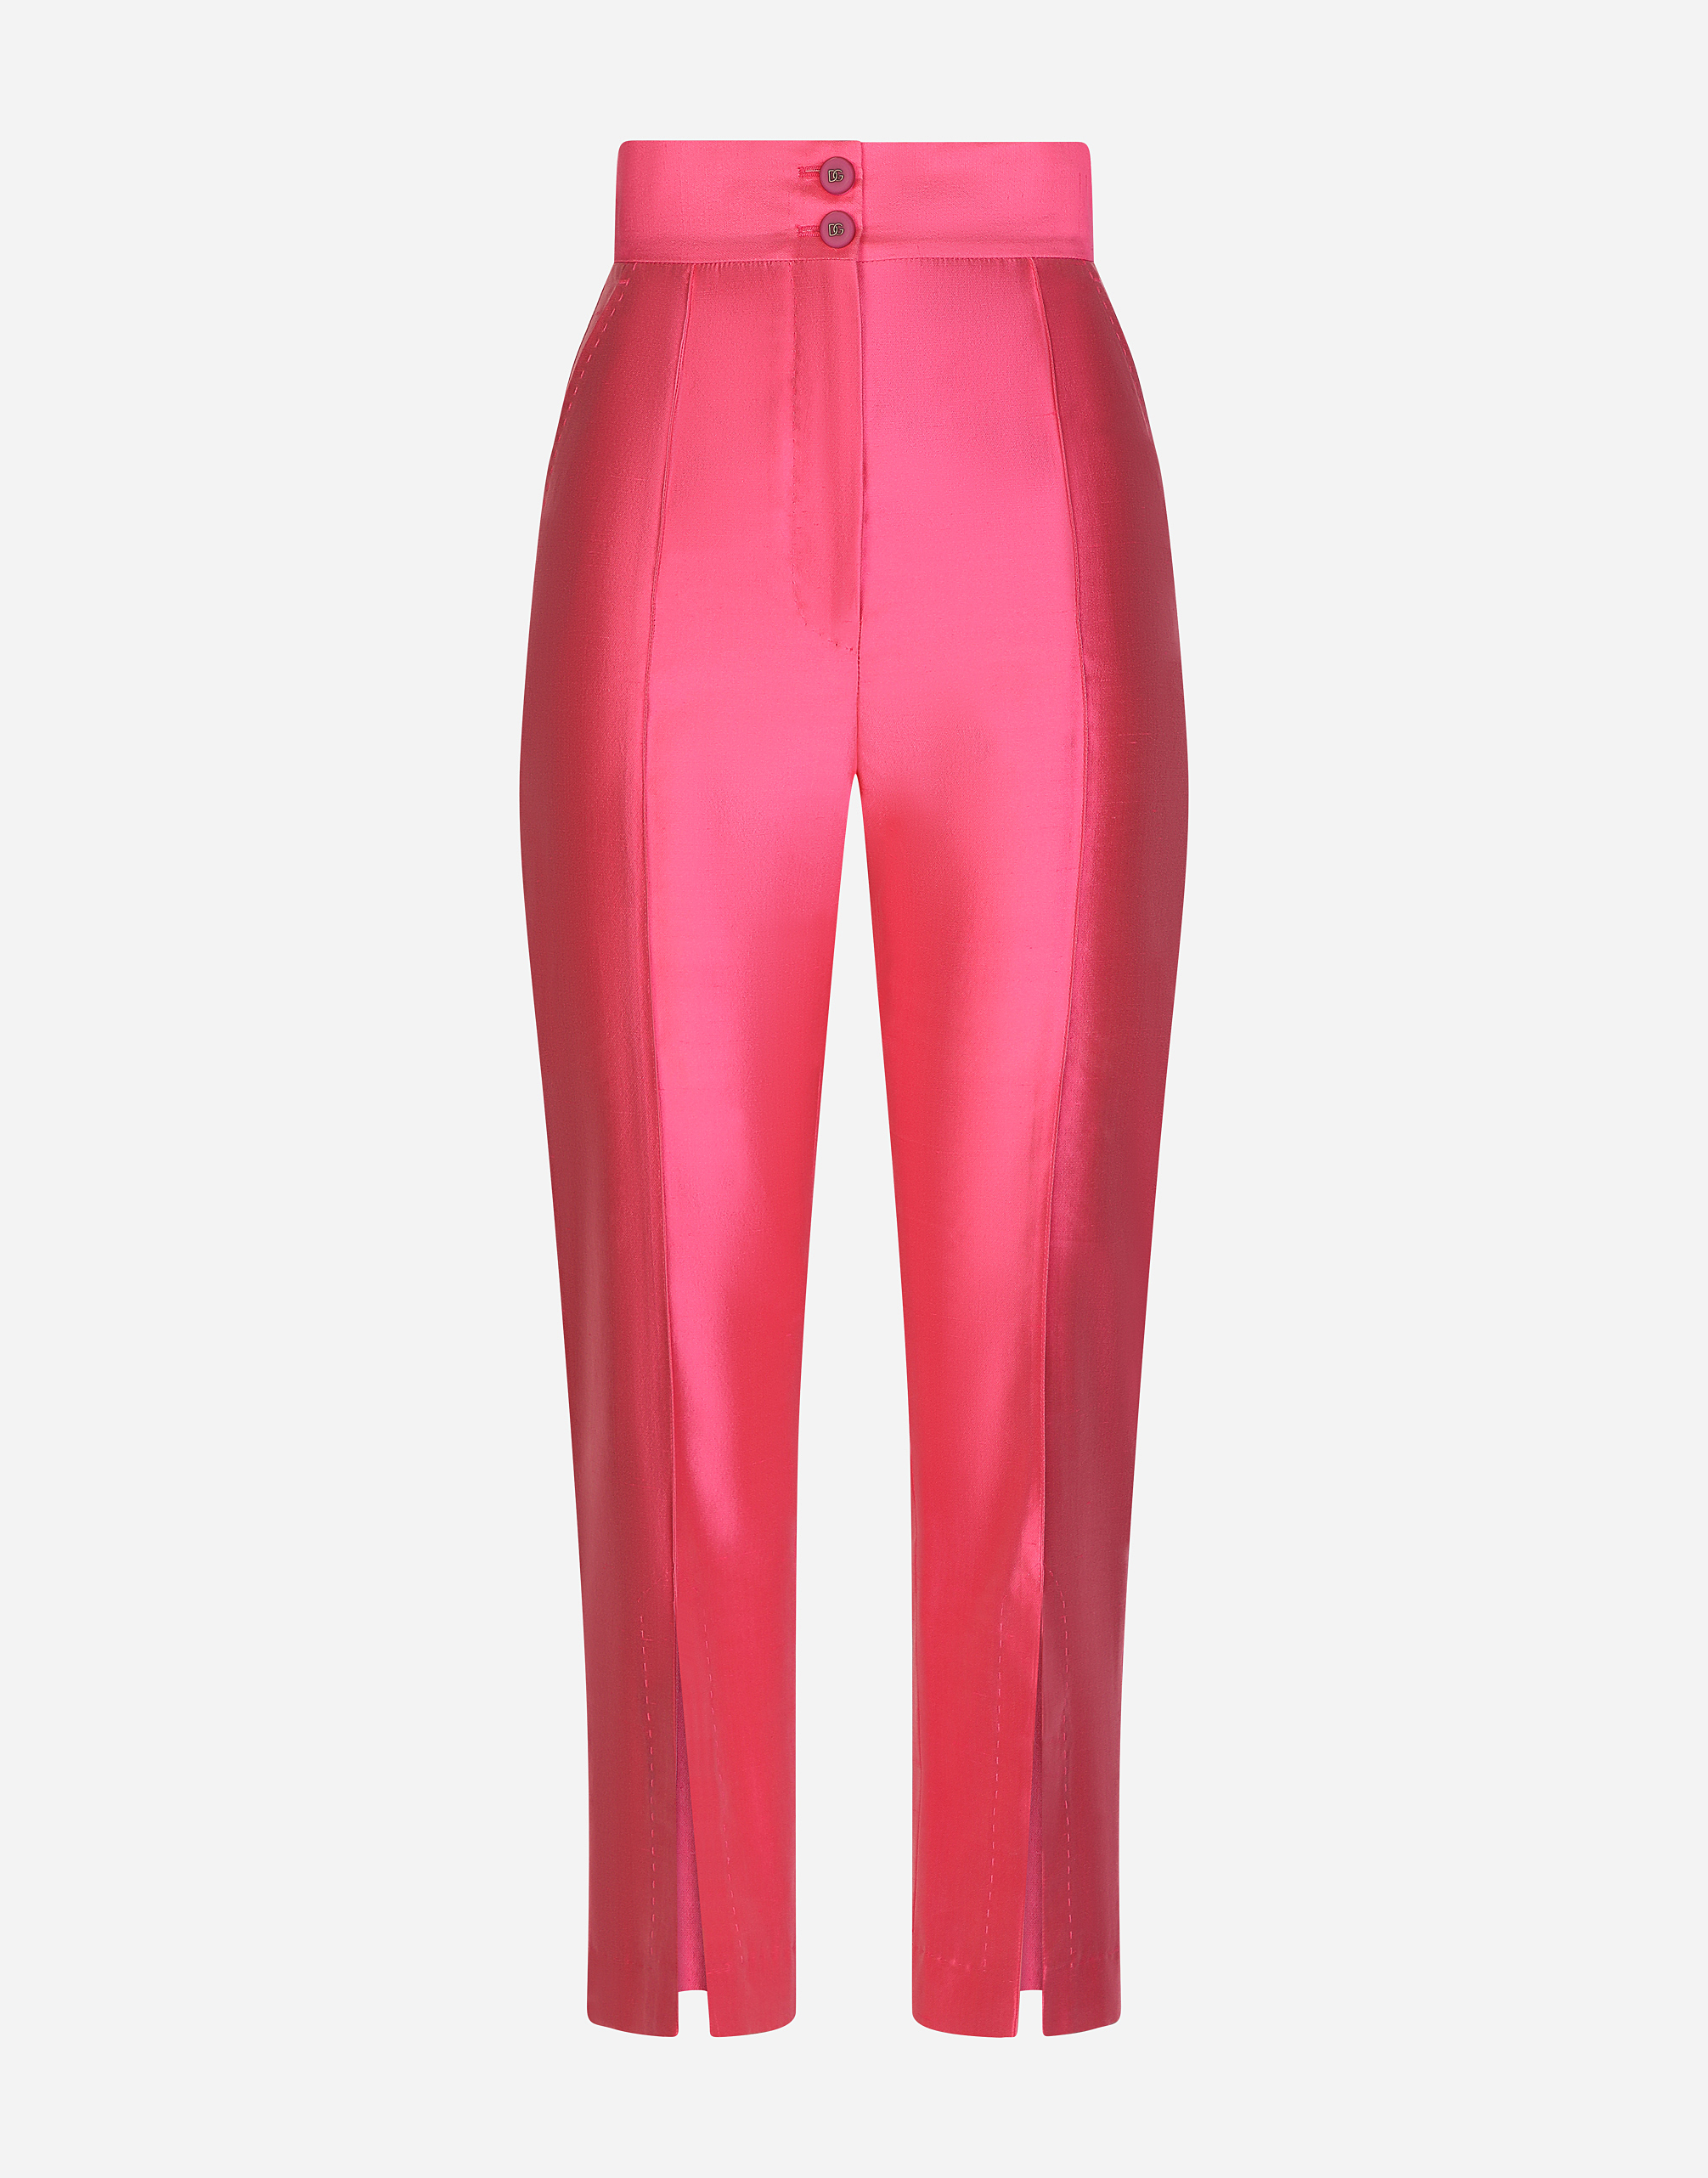 Mikado pants with ankle slits in Fuchsia